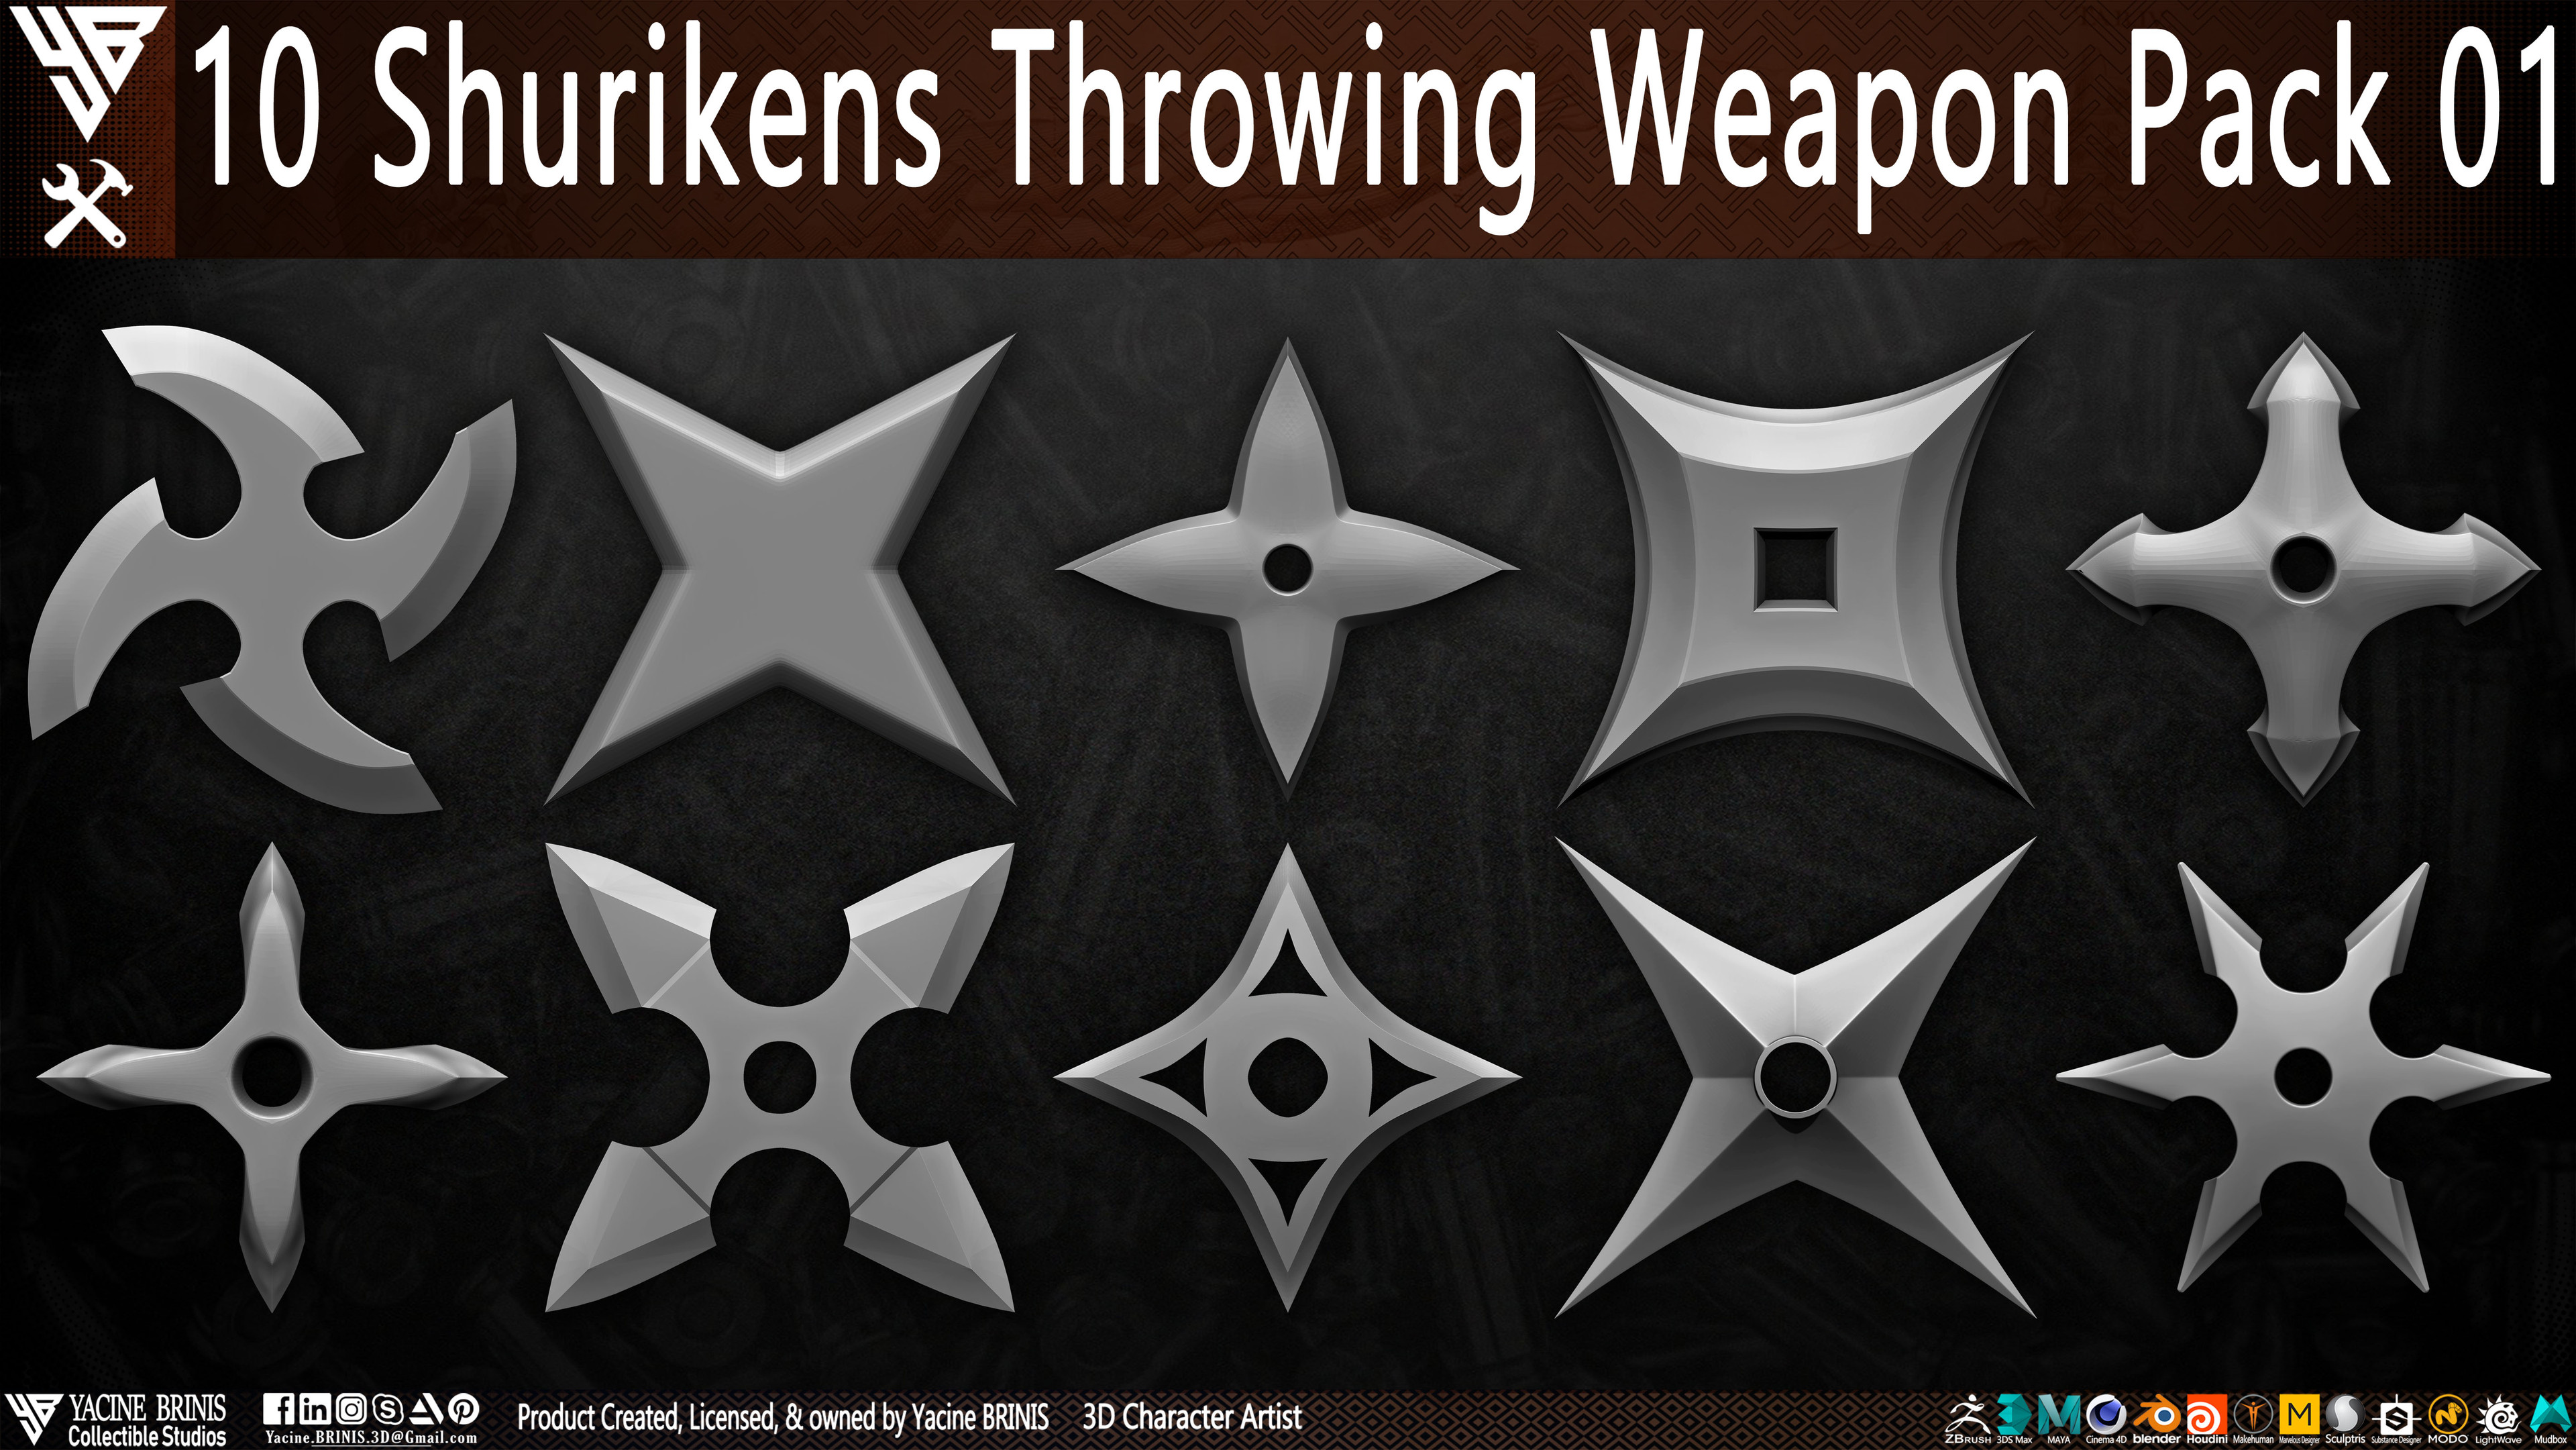 10 Shurikens Throwing Weapon Pack 01 sculpted by Yacine BRINIS Set 01